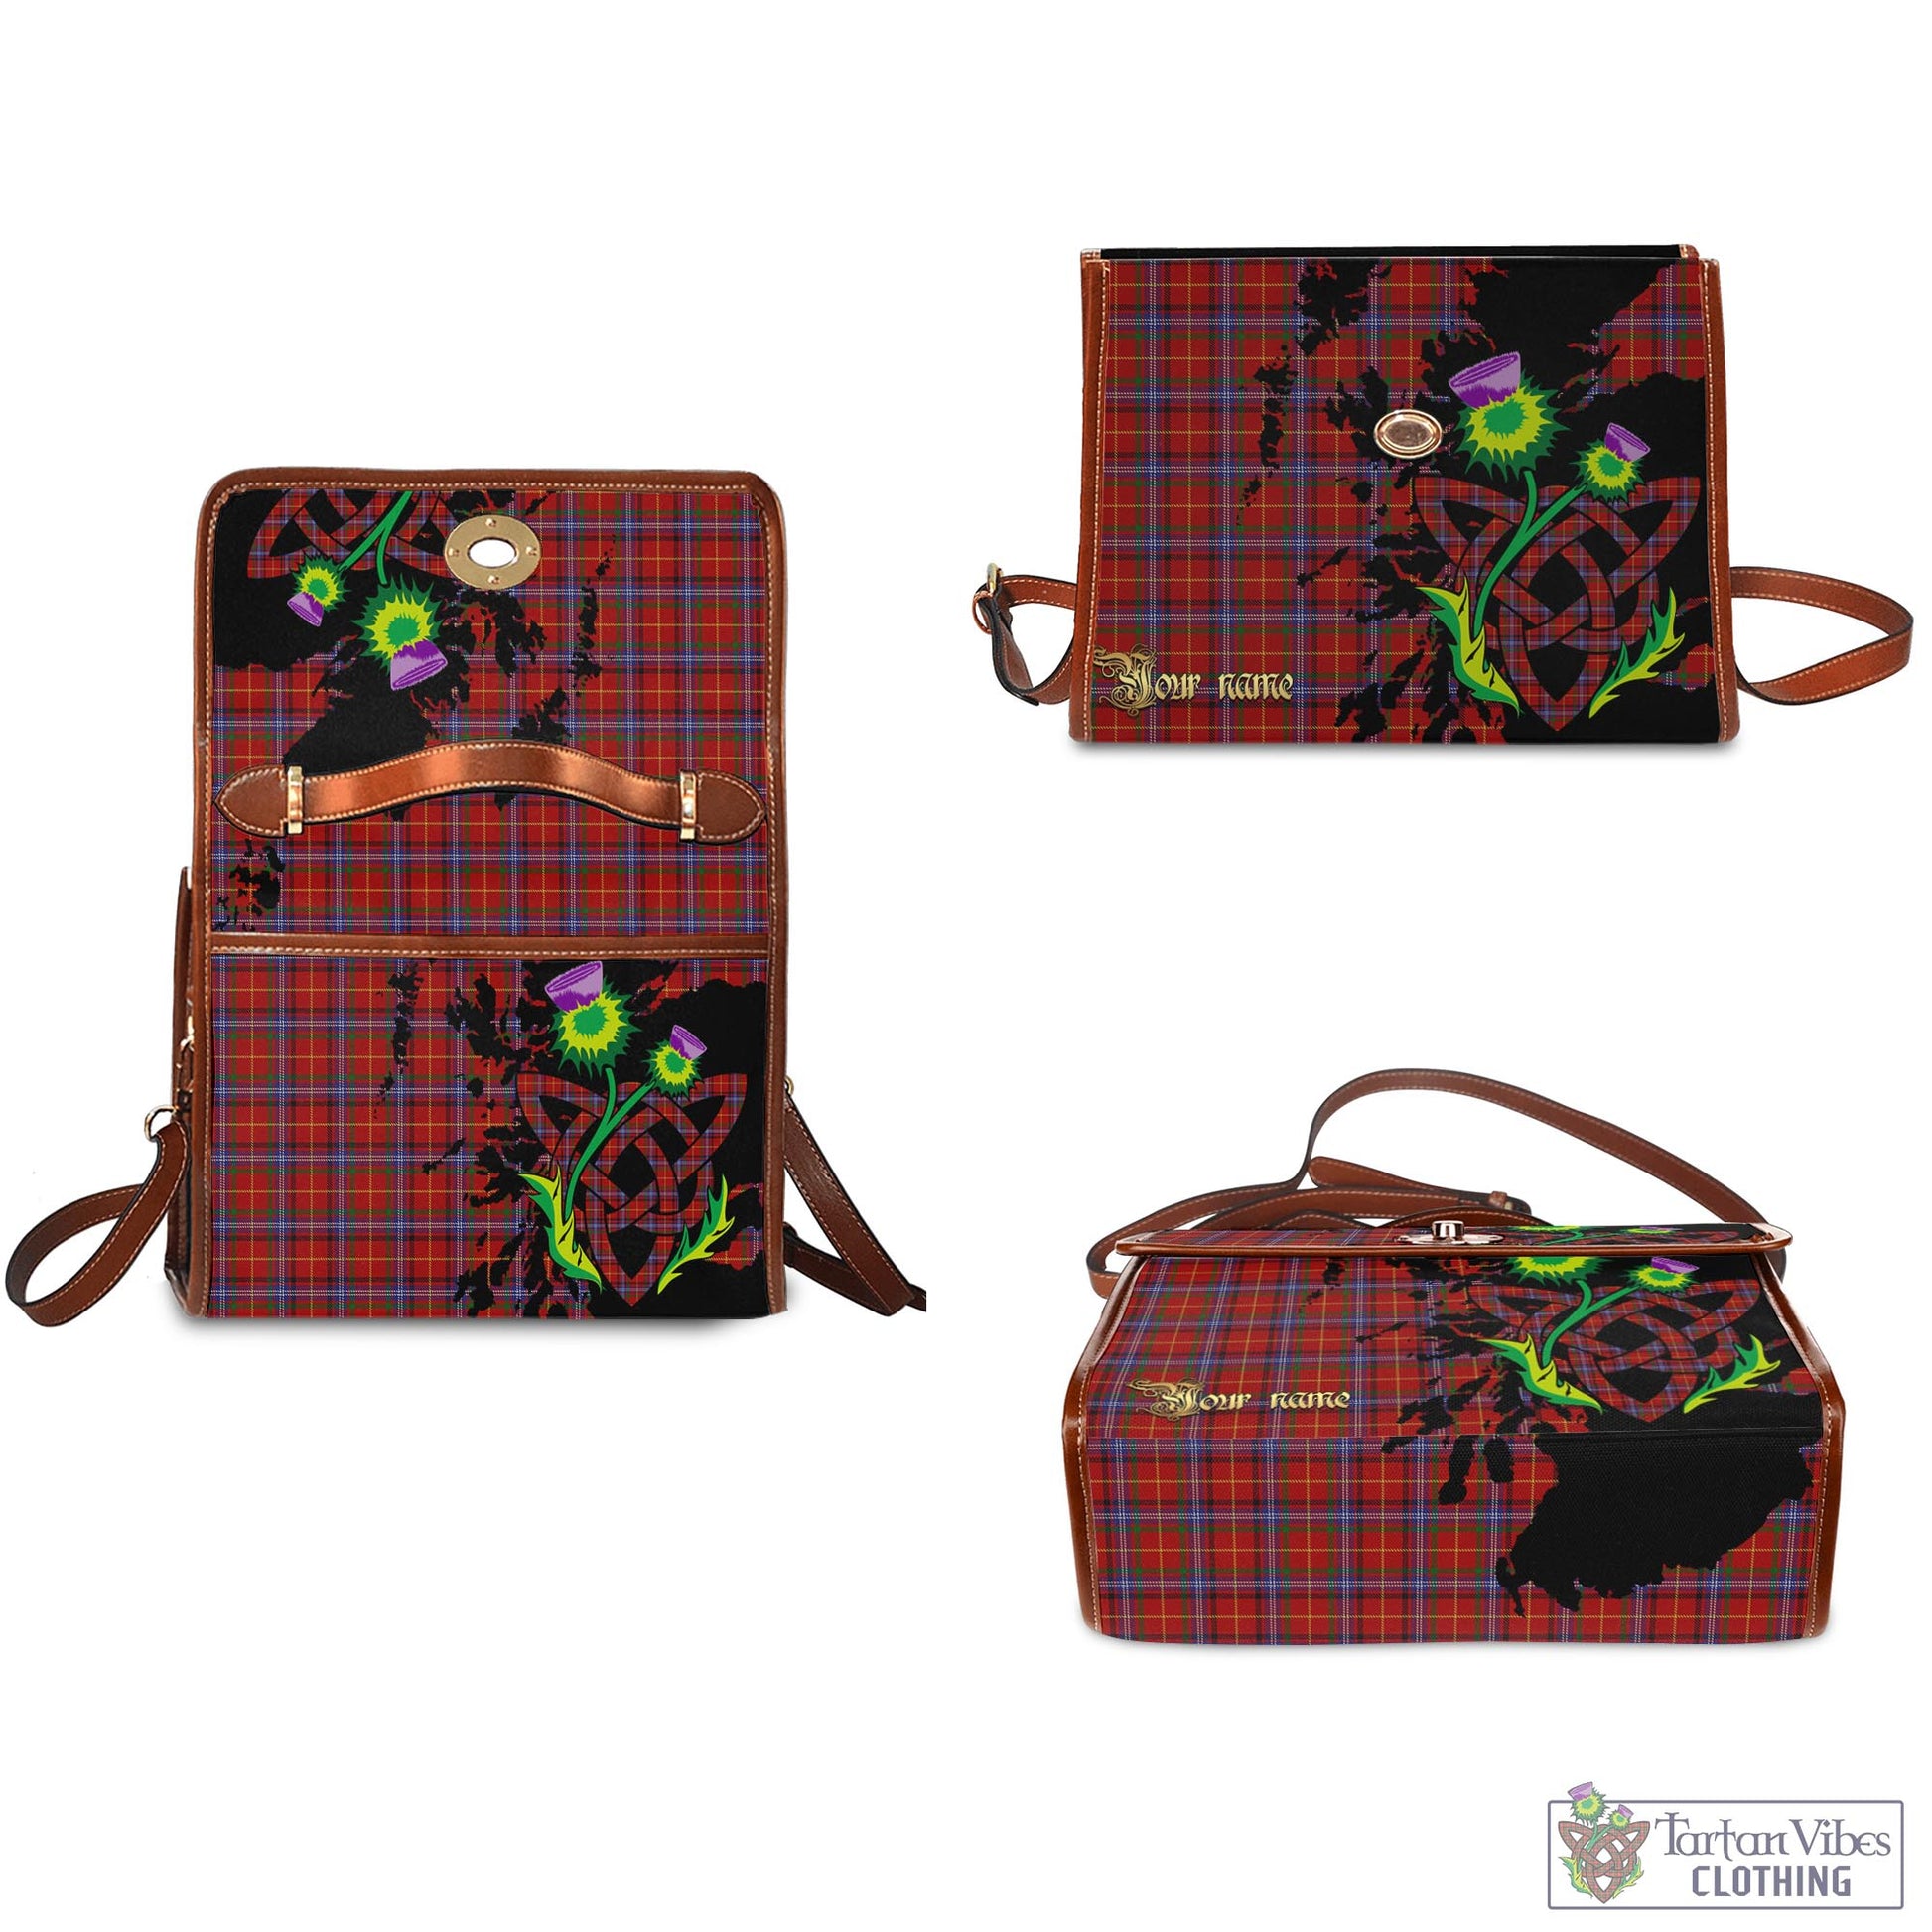 Tartan Vibes Clothing Maynard Tartan Waterproof Canvas Bag with Scotland Map and Thistle Celtic Accents